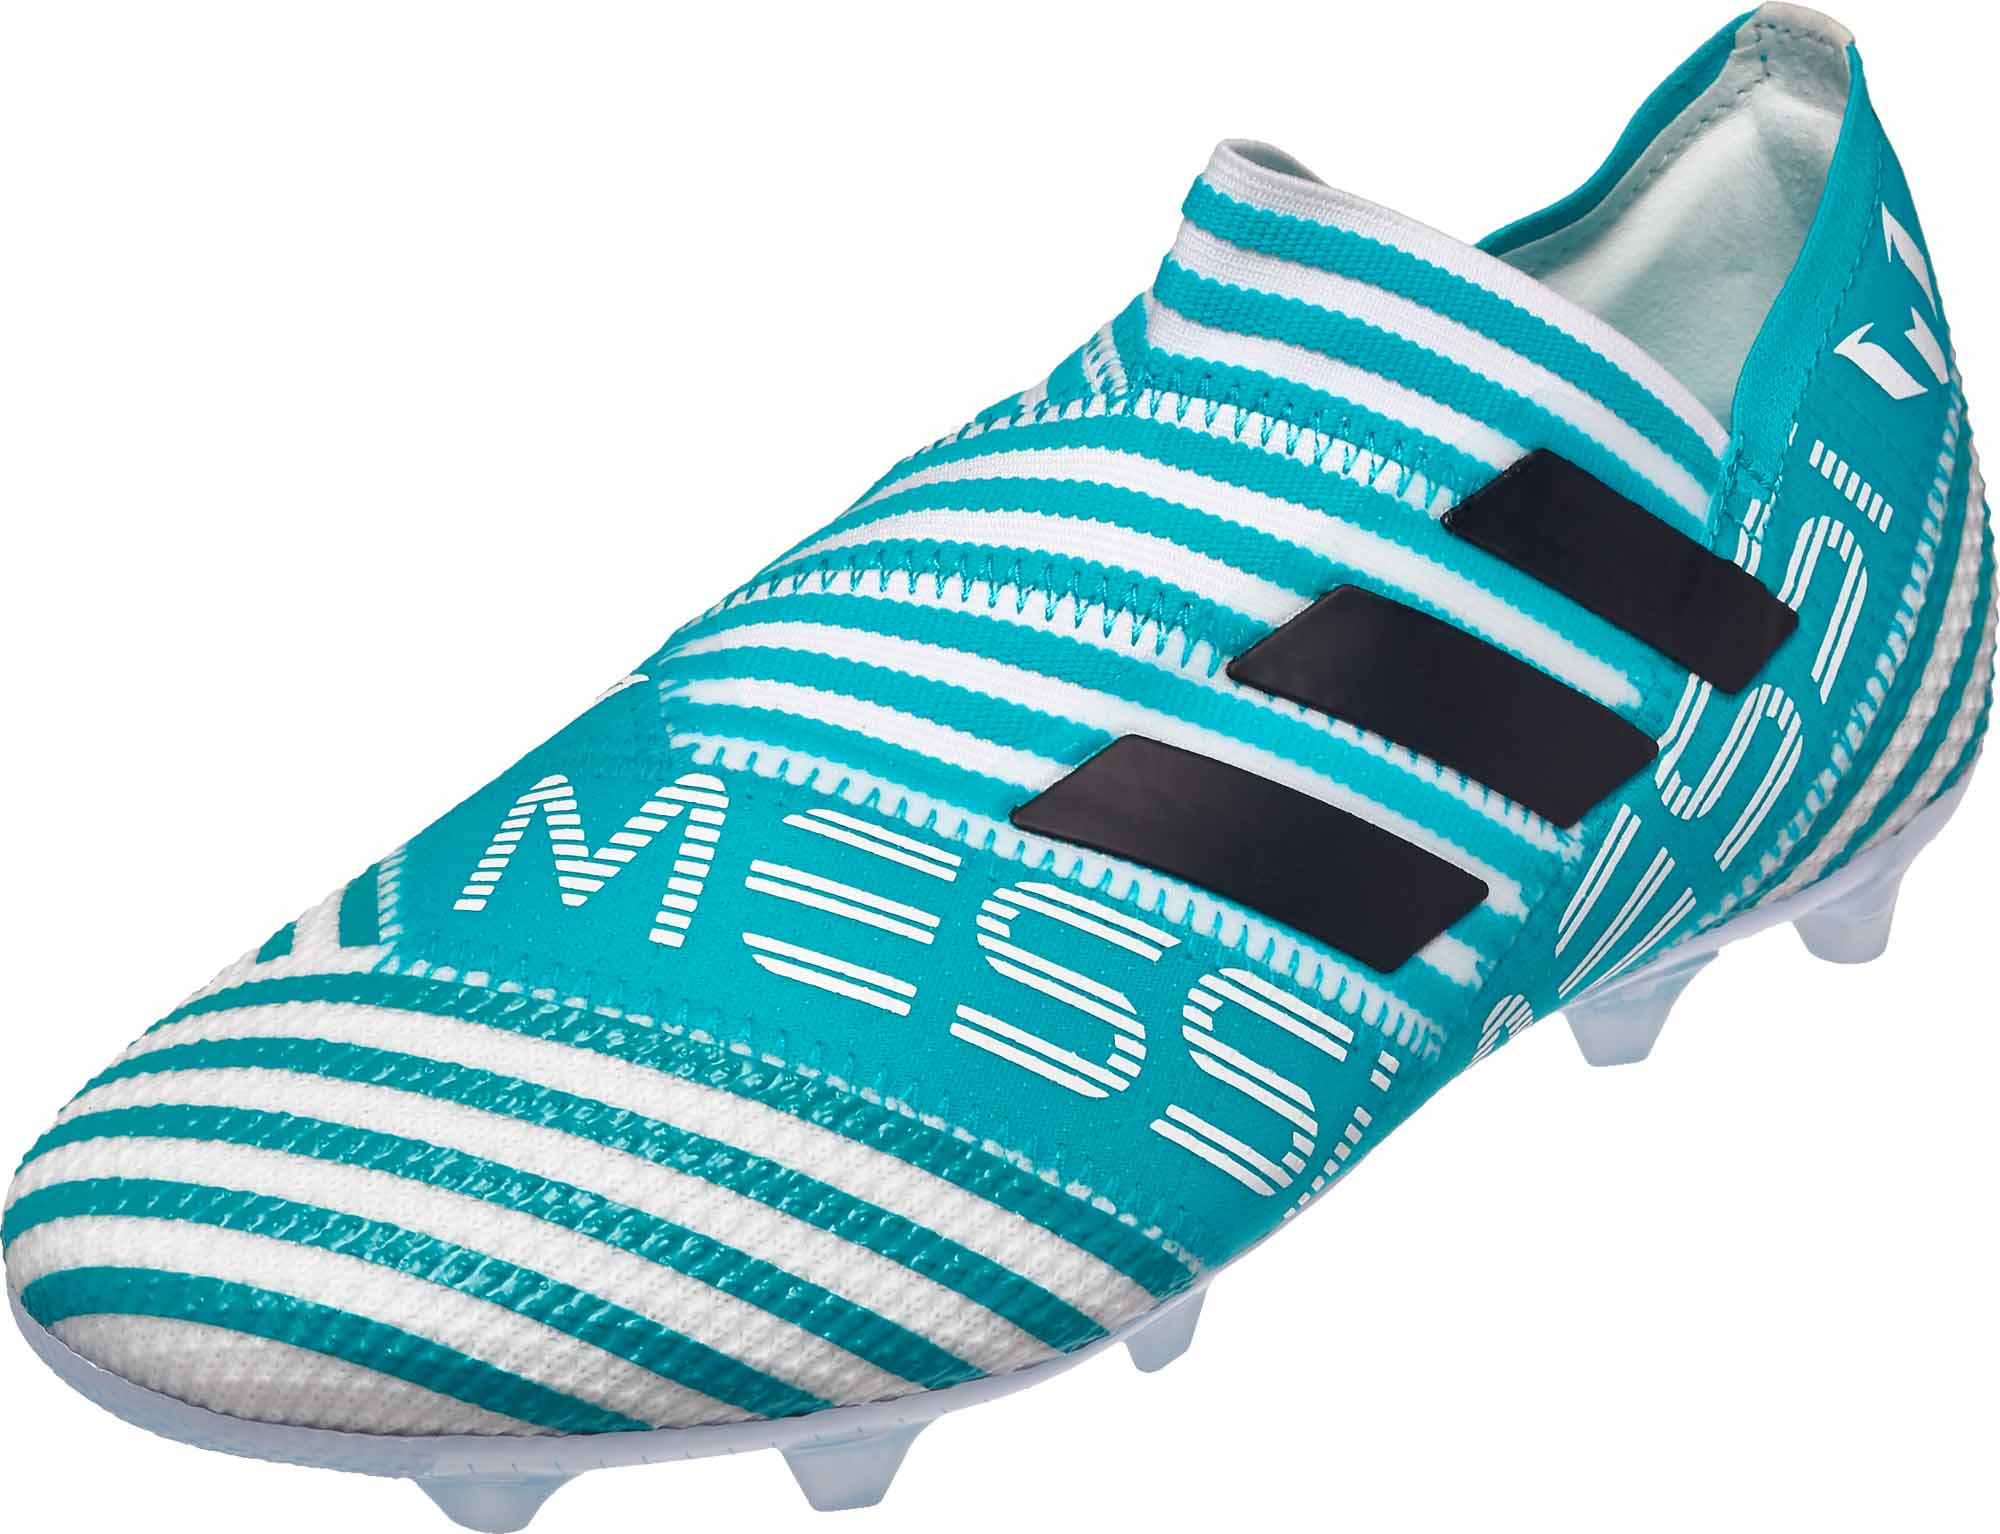 messi cleats for kids